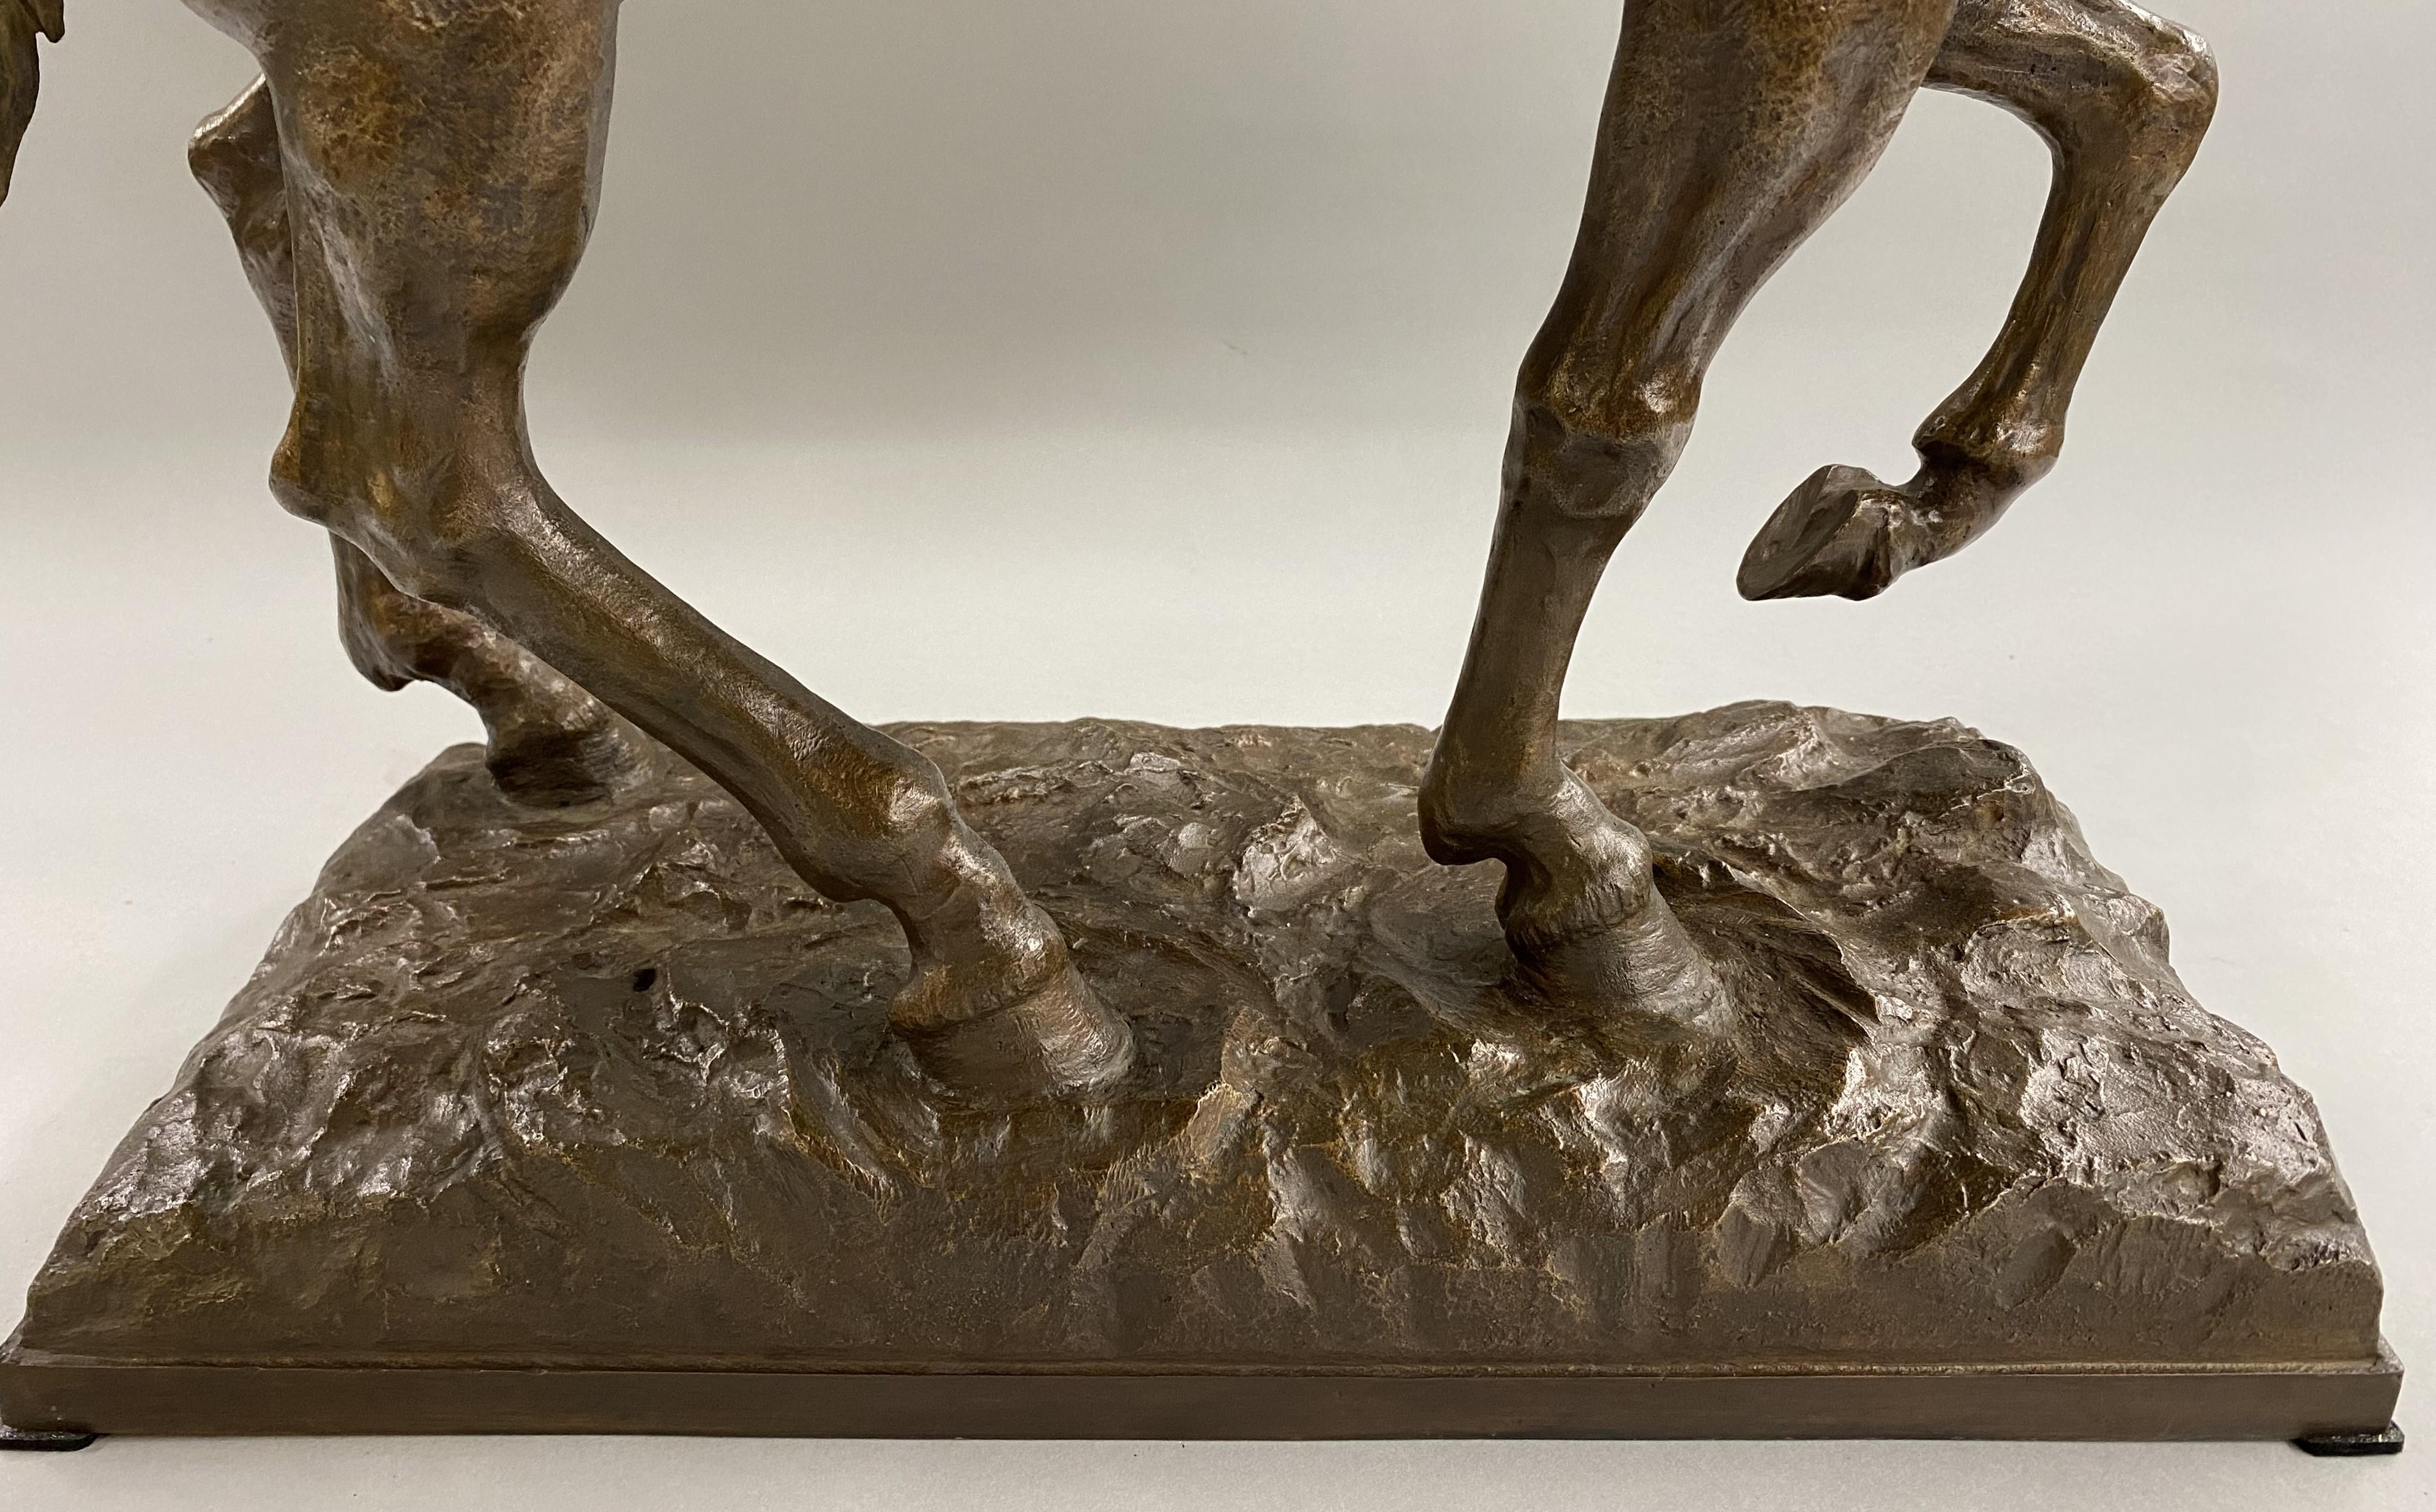 A fine limited edition cast bronze of  a horse by Albanian Sculptor Thanas Papa (20th c). Papa was from the village of Paftal in Berat, Albania, graduated from Jordan Misja High School in Tirana, and won a state scholarship that allowed him to study